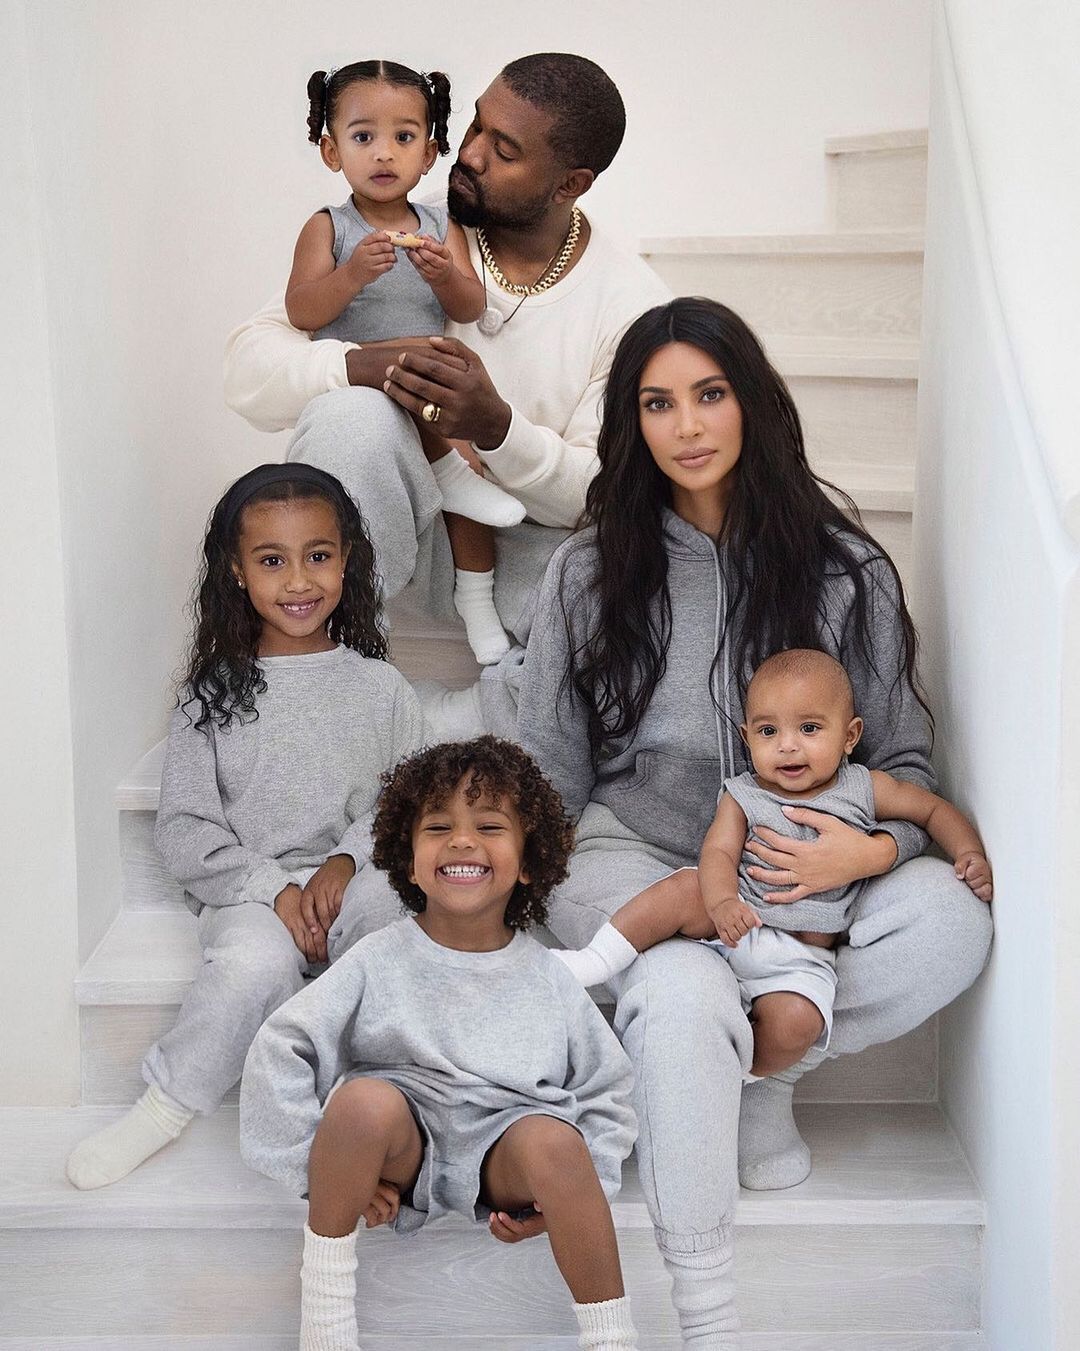 Kim and Kanye posed together with their children for their Christmas photo in 2019